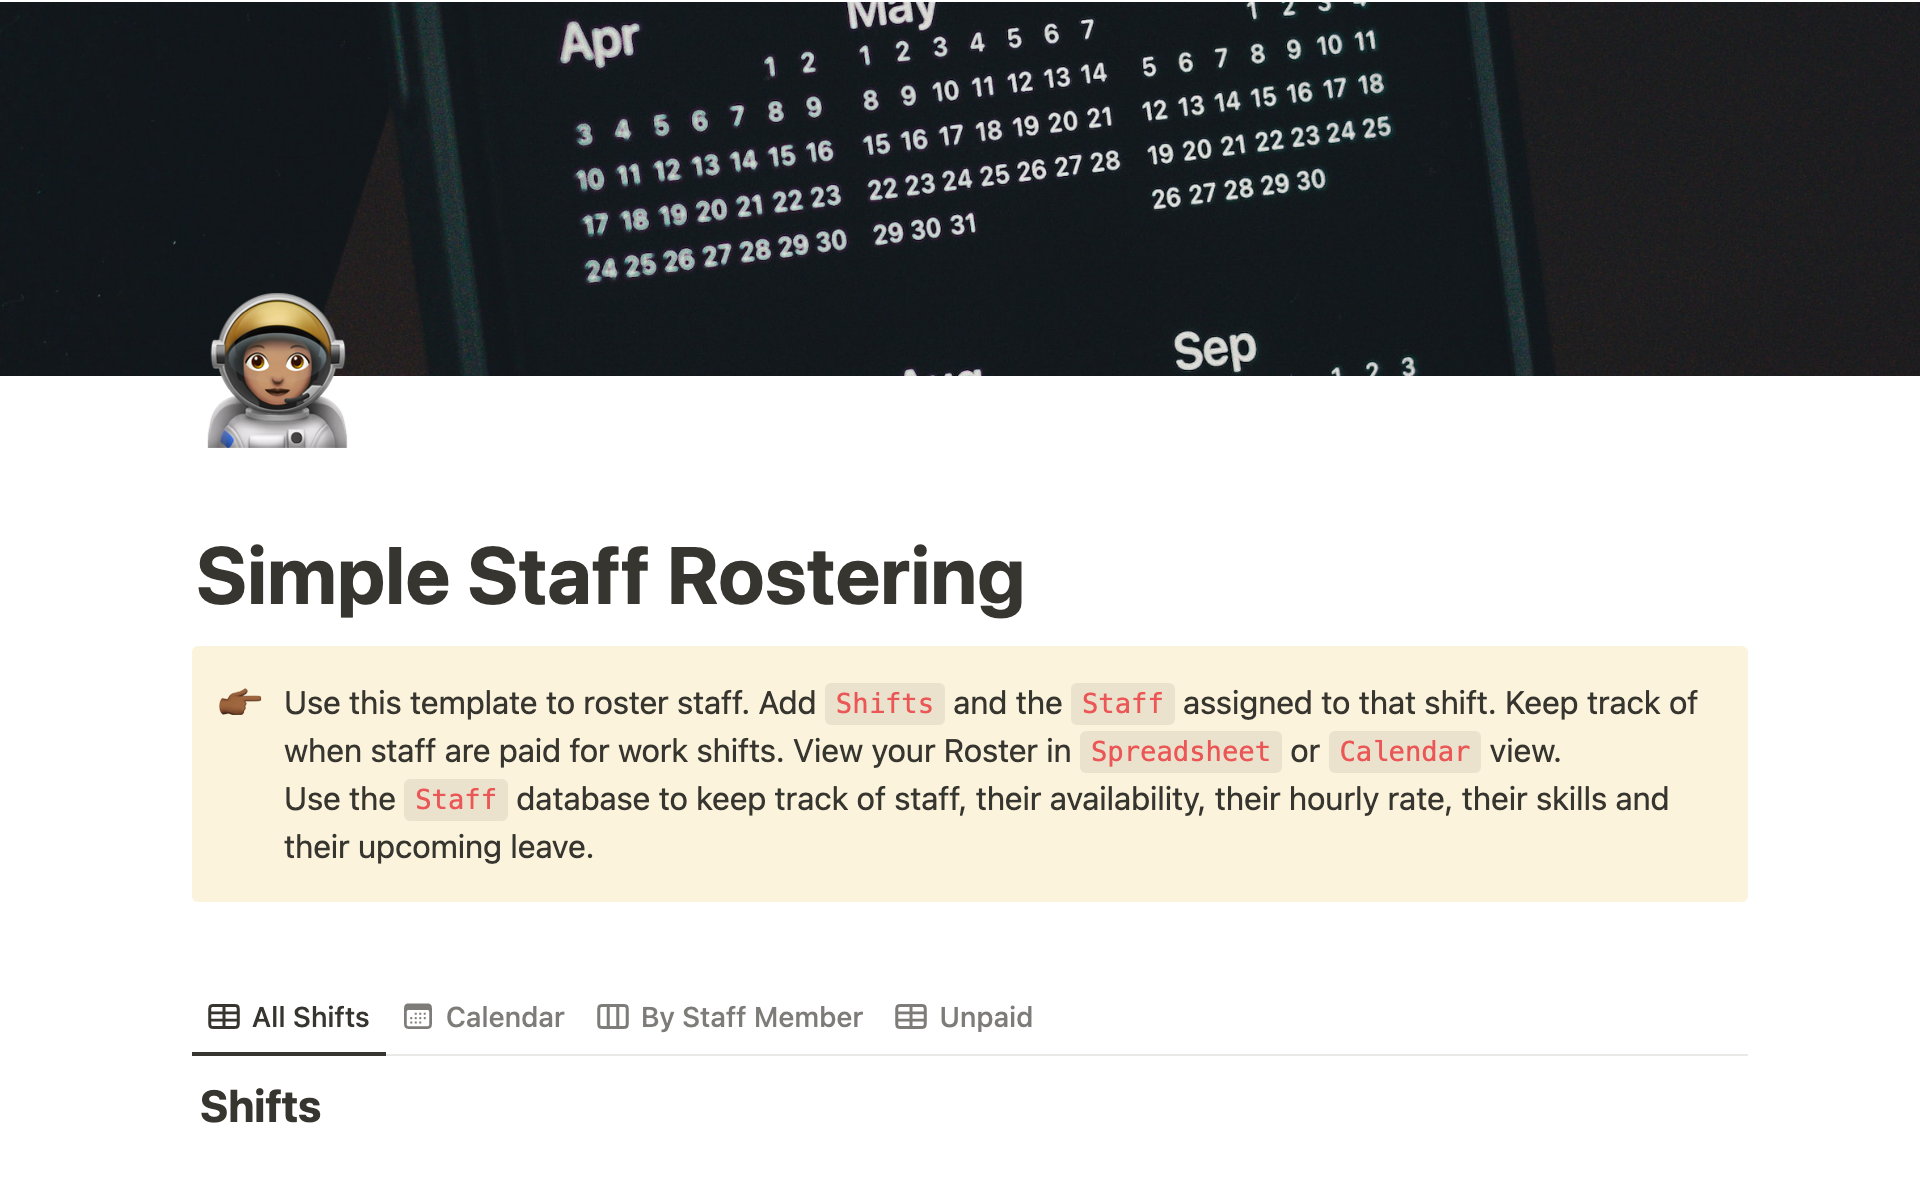 Use this template to roster staff in Notion.